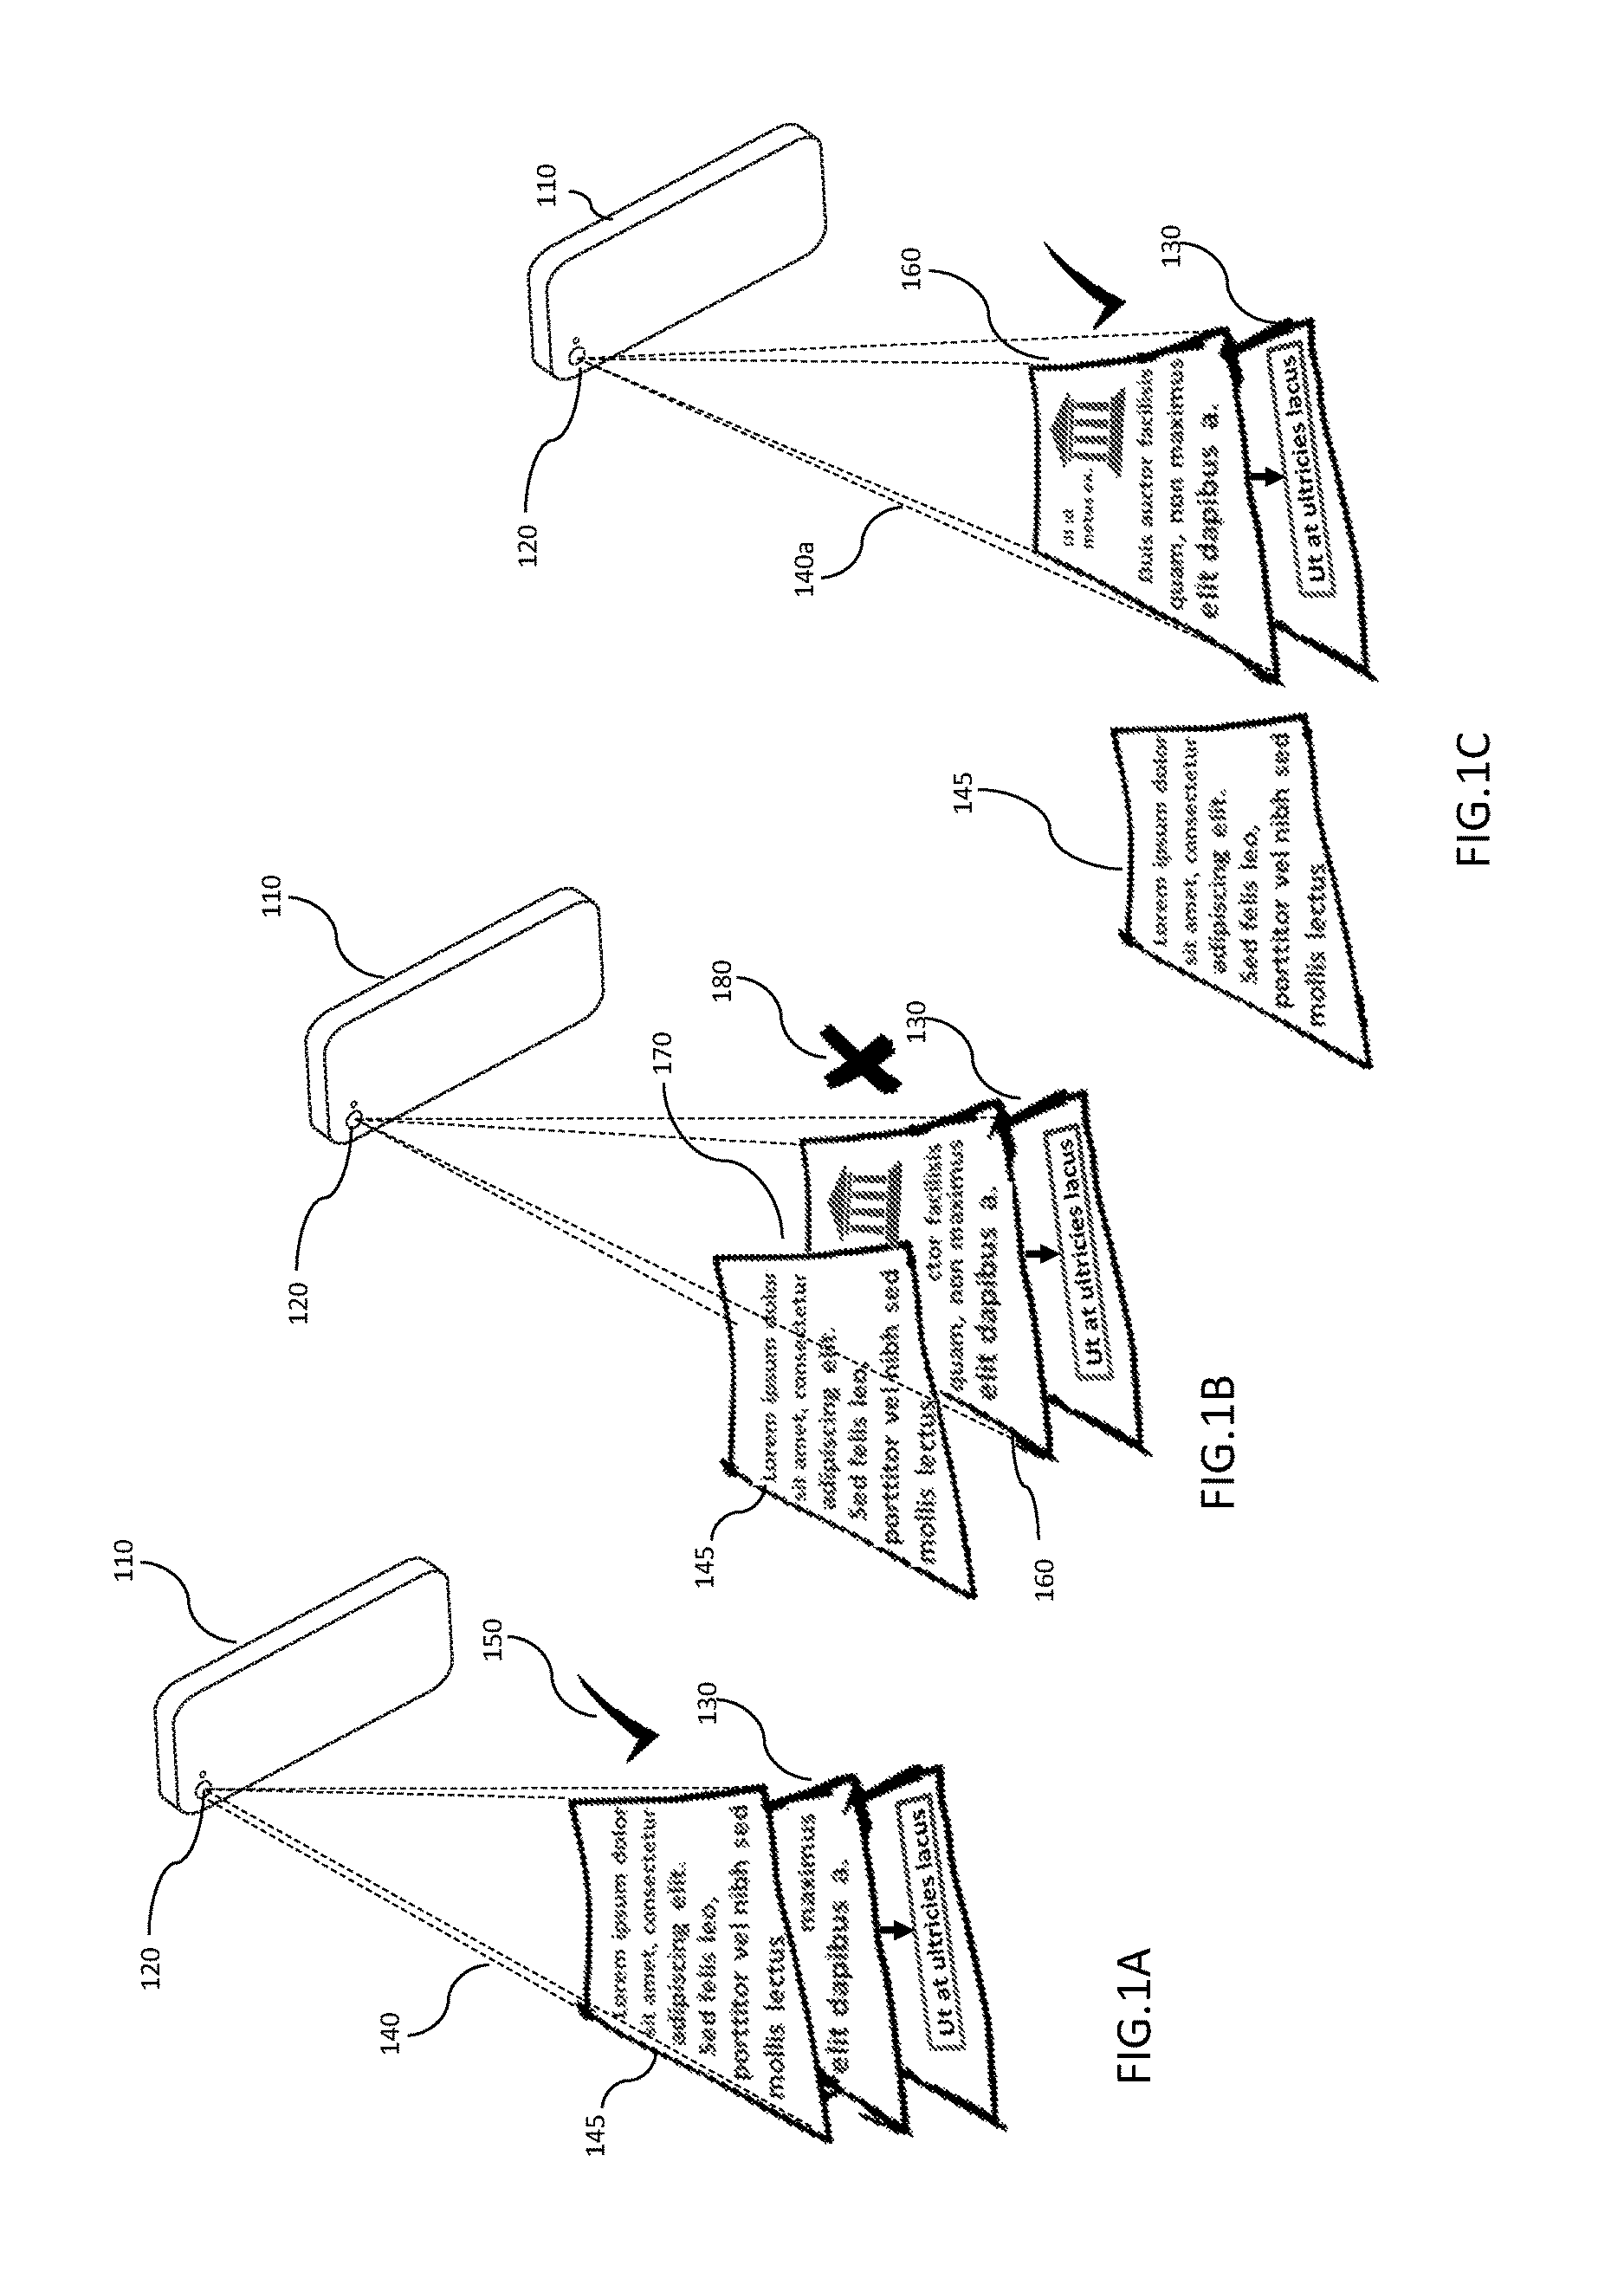 Automatic scanning of document stack with a camera